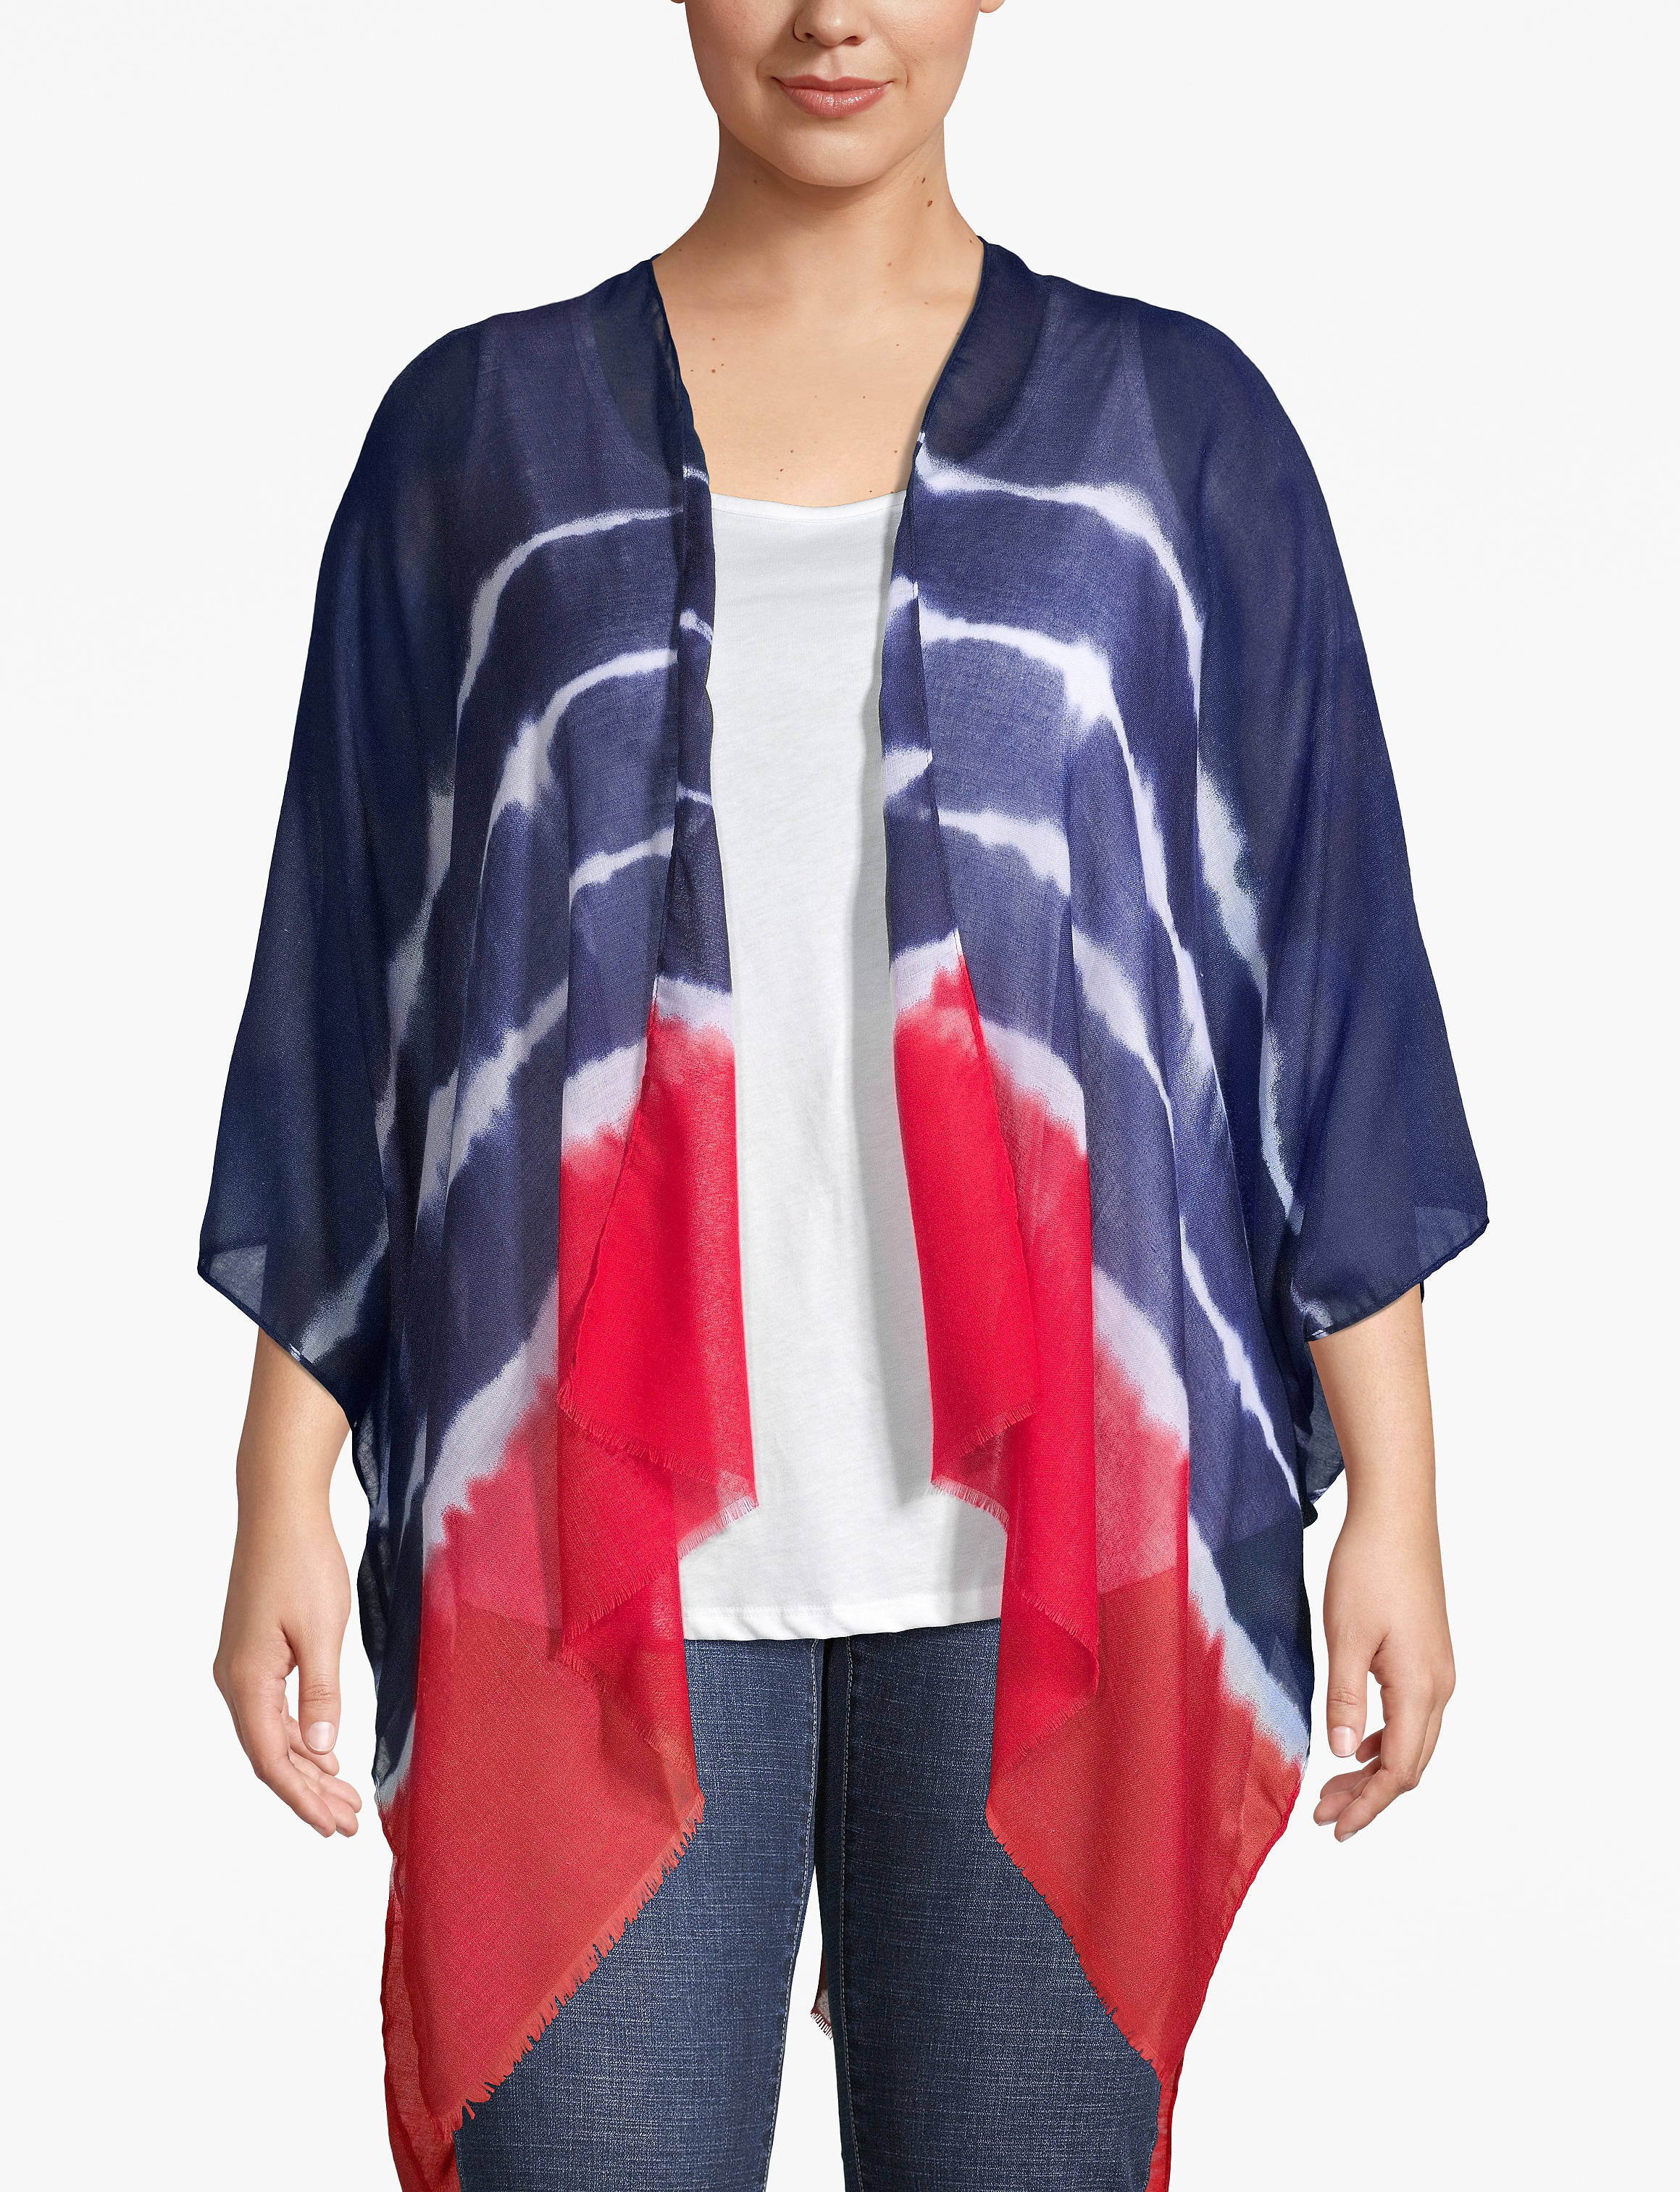 1112168 - S LBO Lt. Wt. Printed Overpiece:Blue Ribbon/ Ribbon Red Placed Tie-Dye (LBO):ONESZ Product Image 1